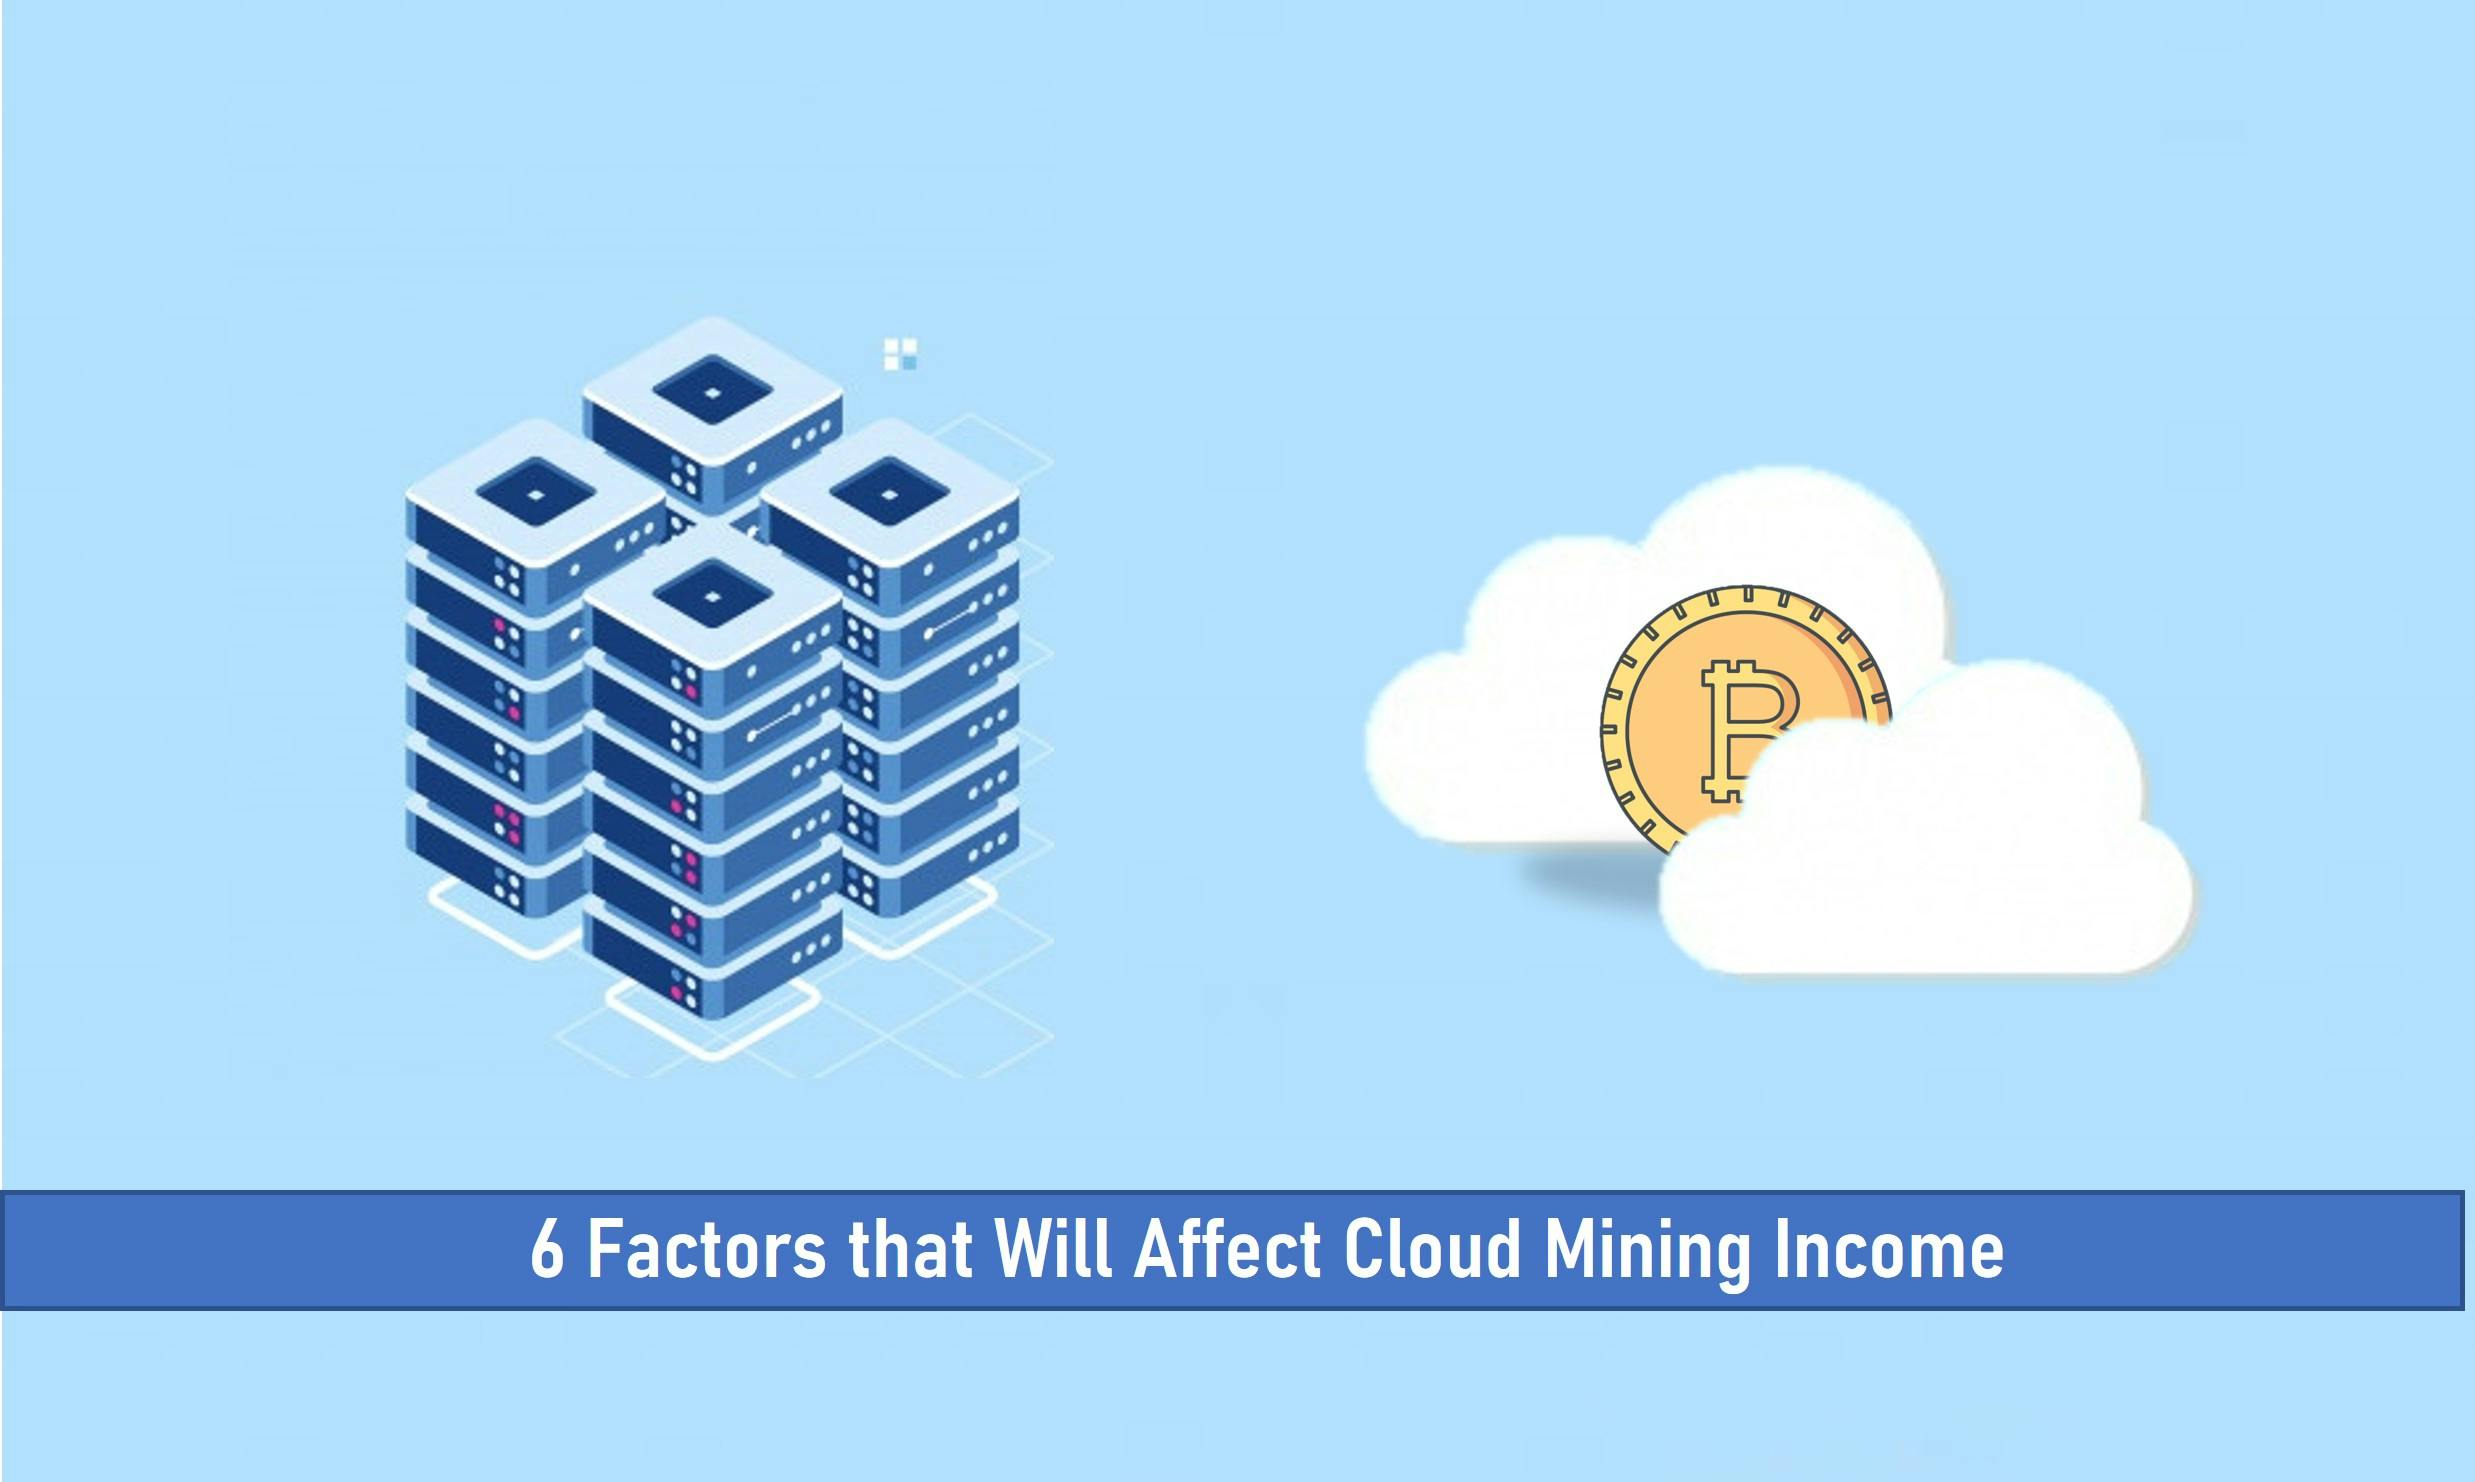 6 Factors that Will Affect Cloud Mining Income in 2022